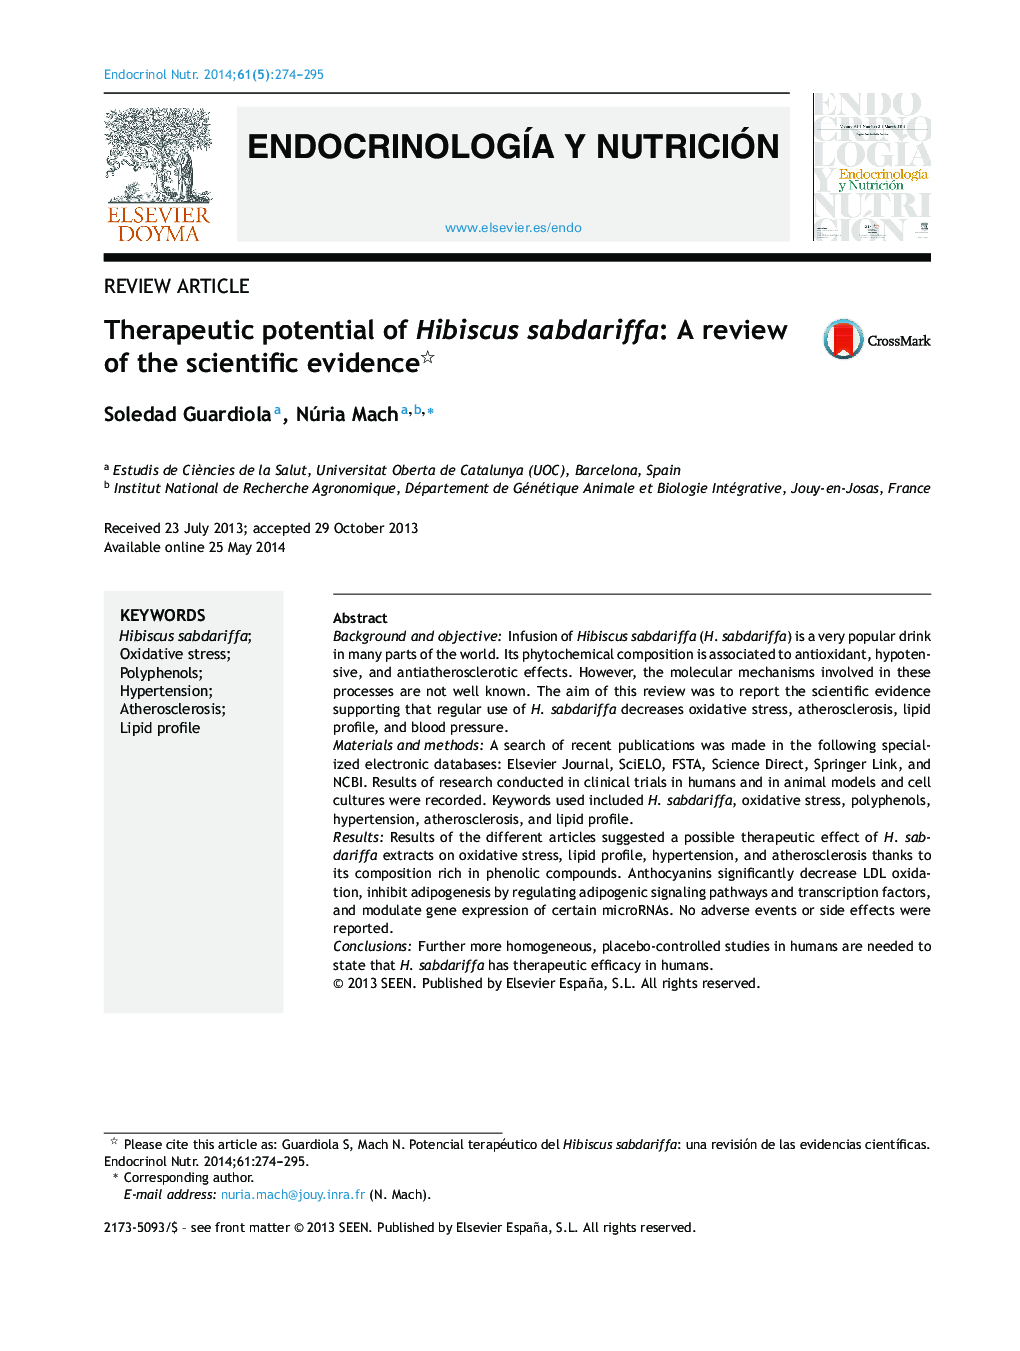 Therapeutic potential of Hibiscus sabdariffa: A review of the scientific evidence 